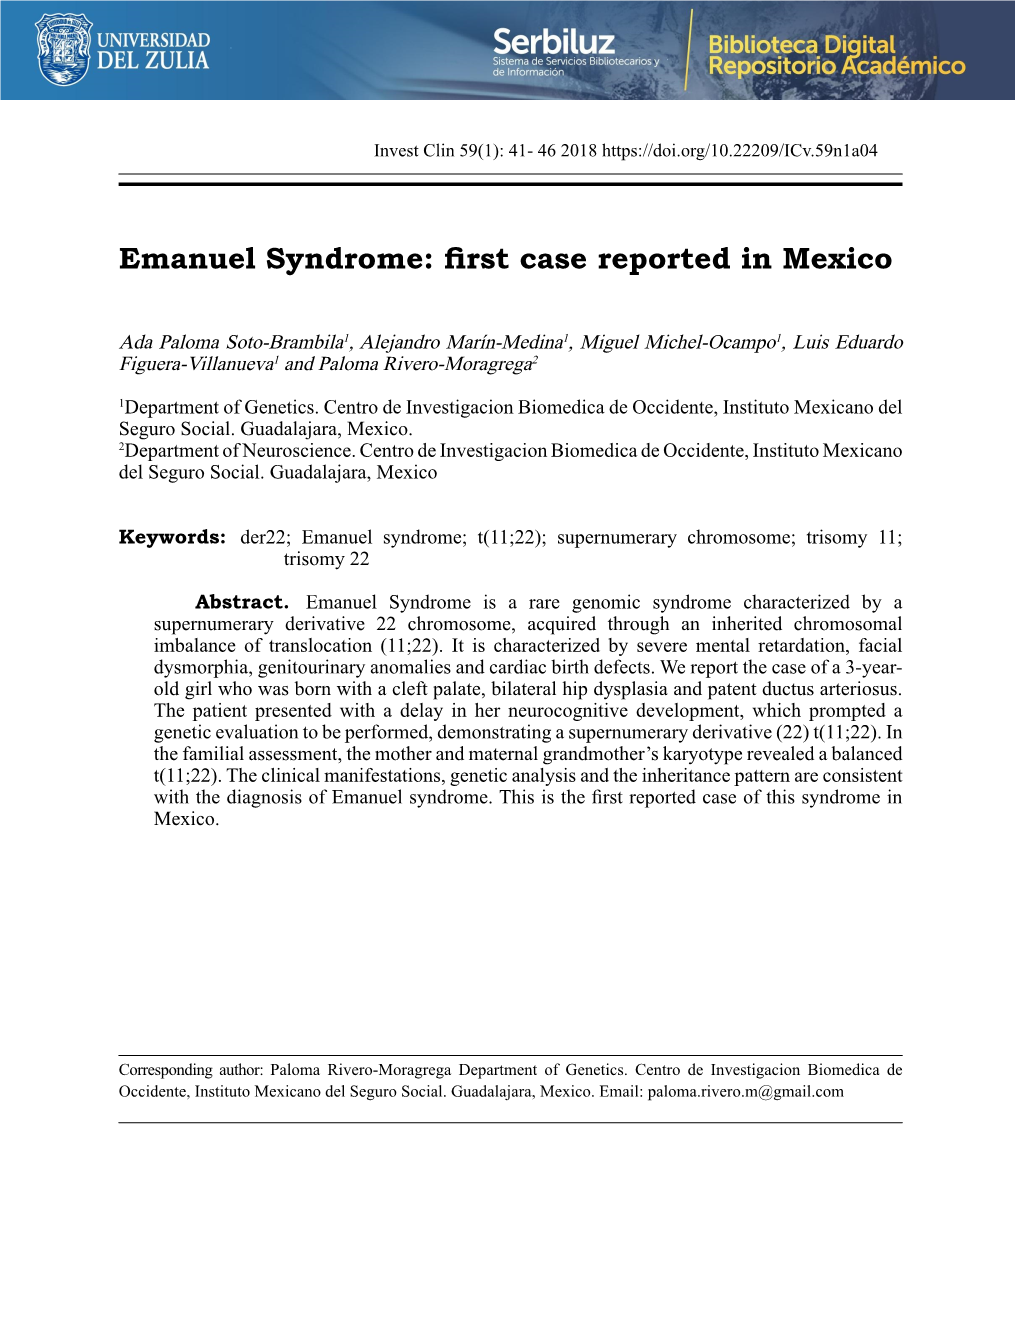 Emanuel Syndrome: First Case Reported in Mexico